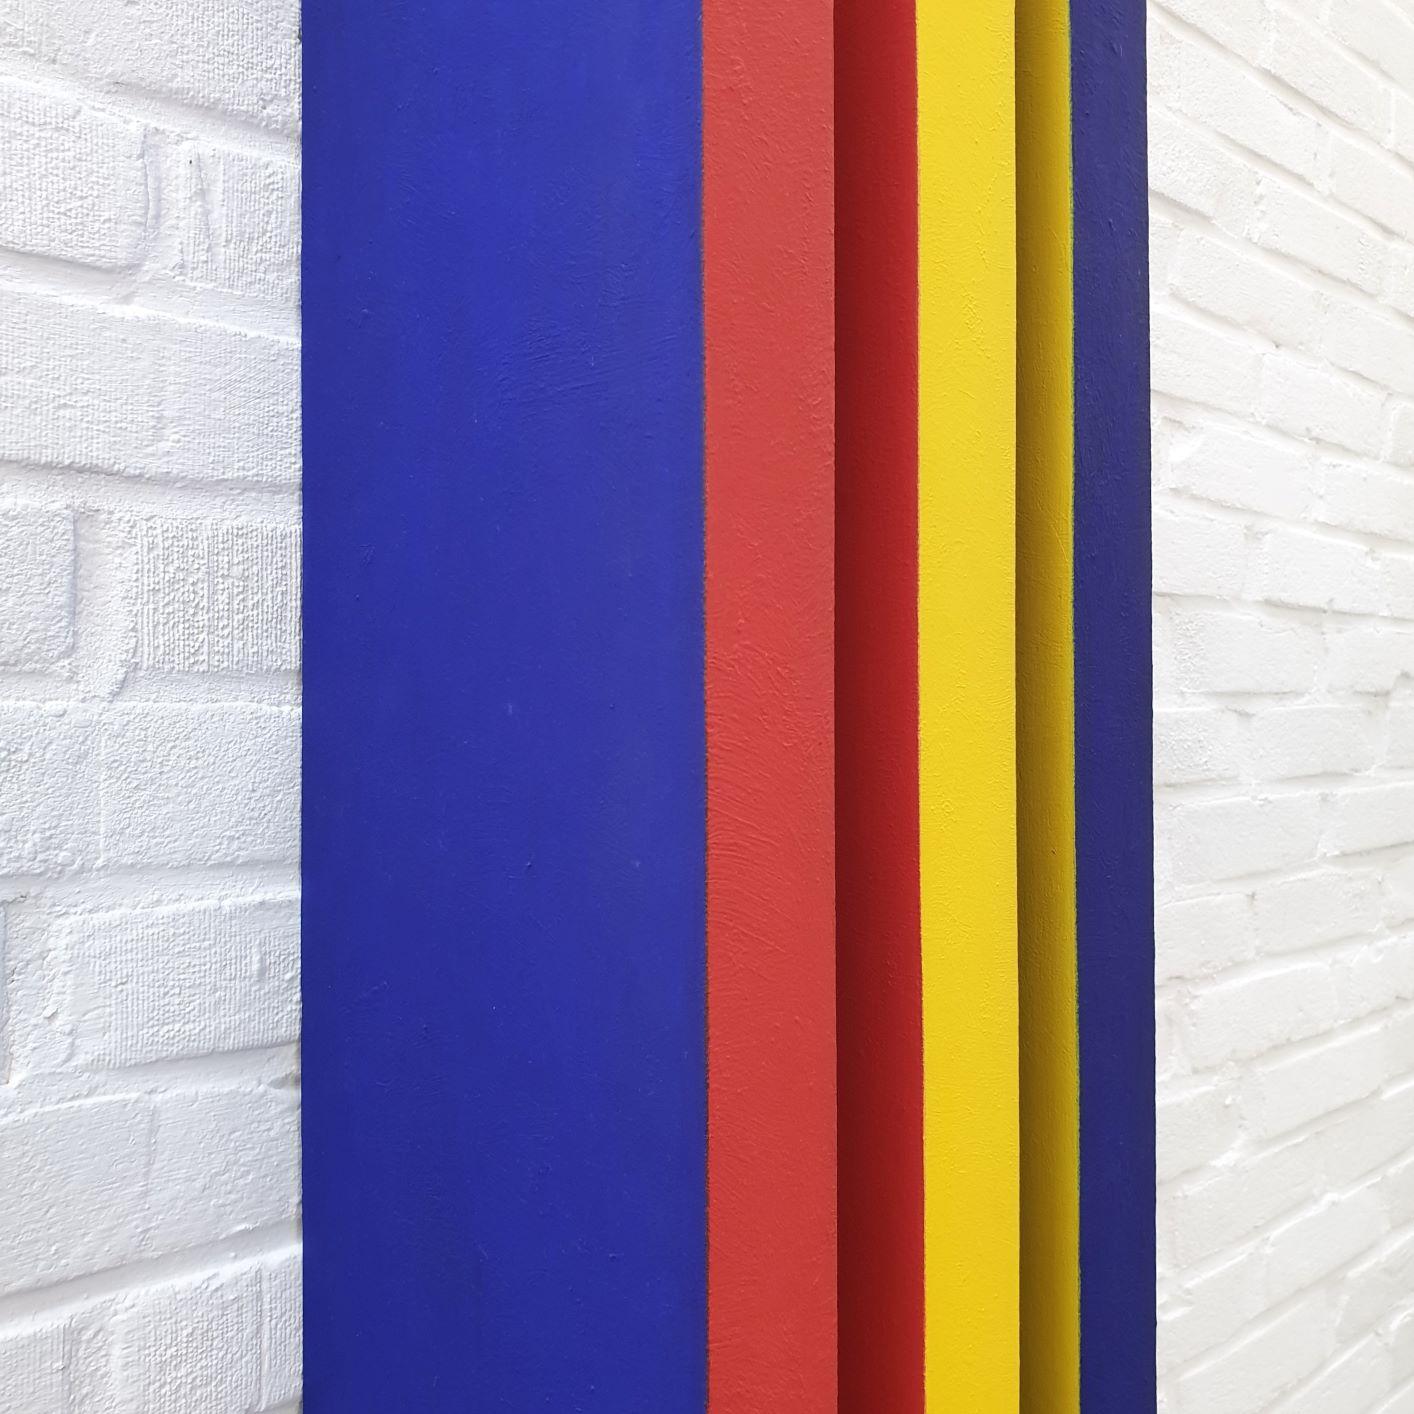 Réflexion des couleurs is a unique contemporary modern triptych sculpture painting relief just released from the private collection of French-Dutch artist Olivier Julia. The relief is made from three painted wood panels with alternating red yellow